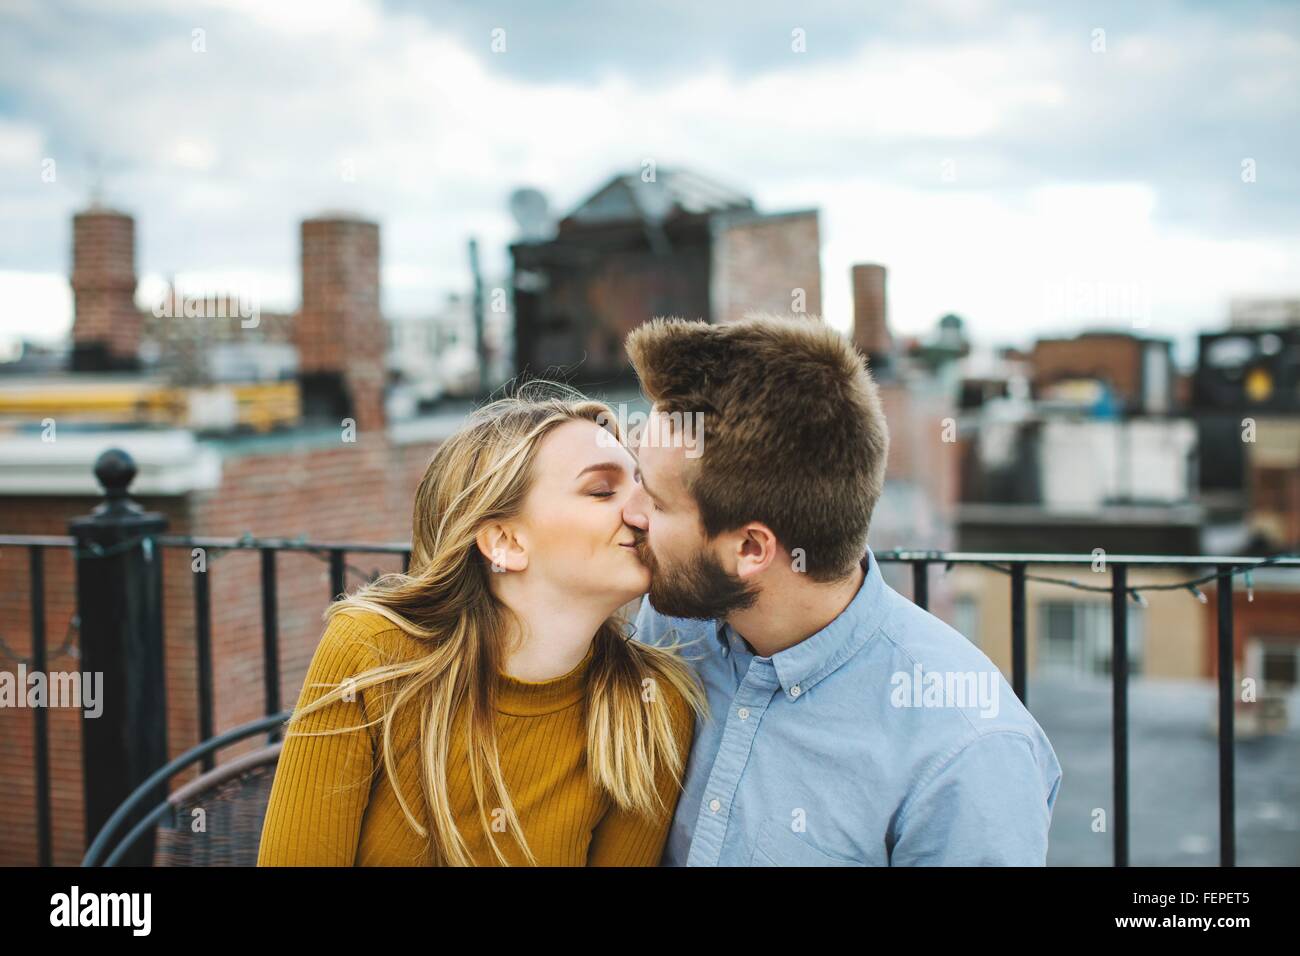 Romantic young couple kissing on city rooftop terrace Stock Photo